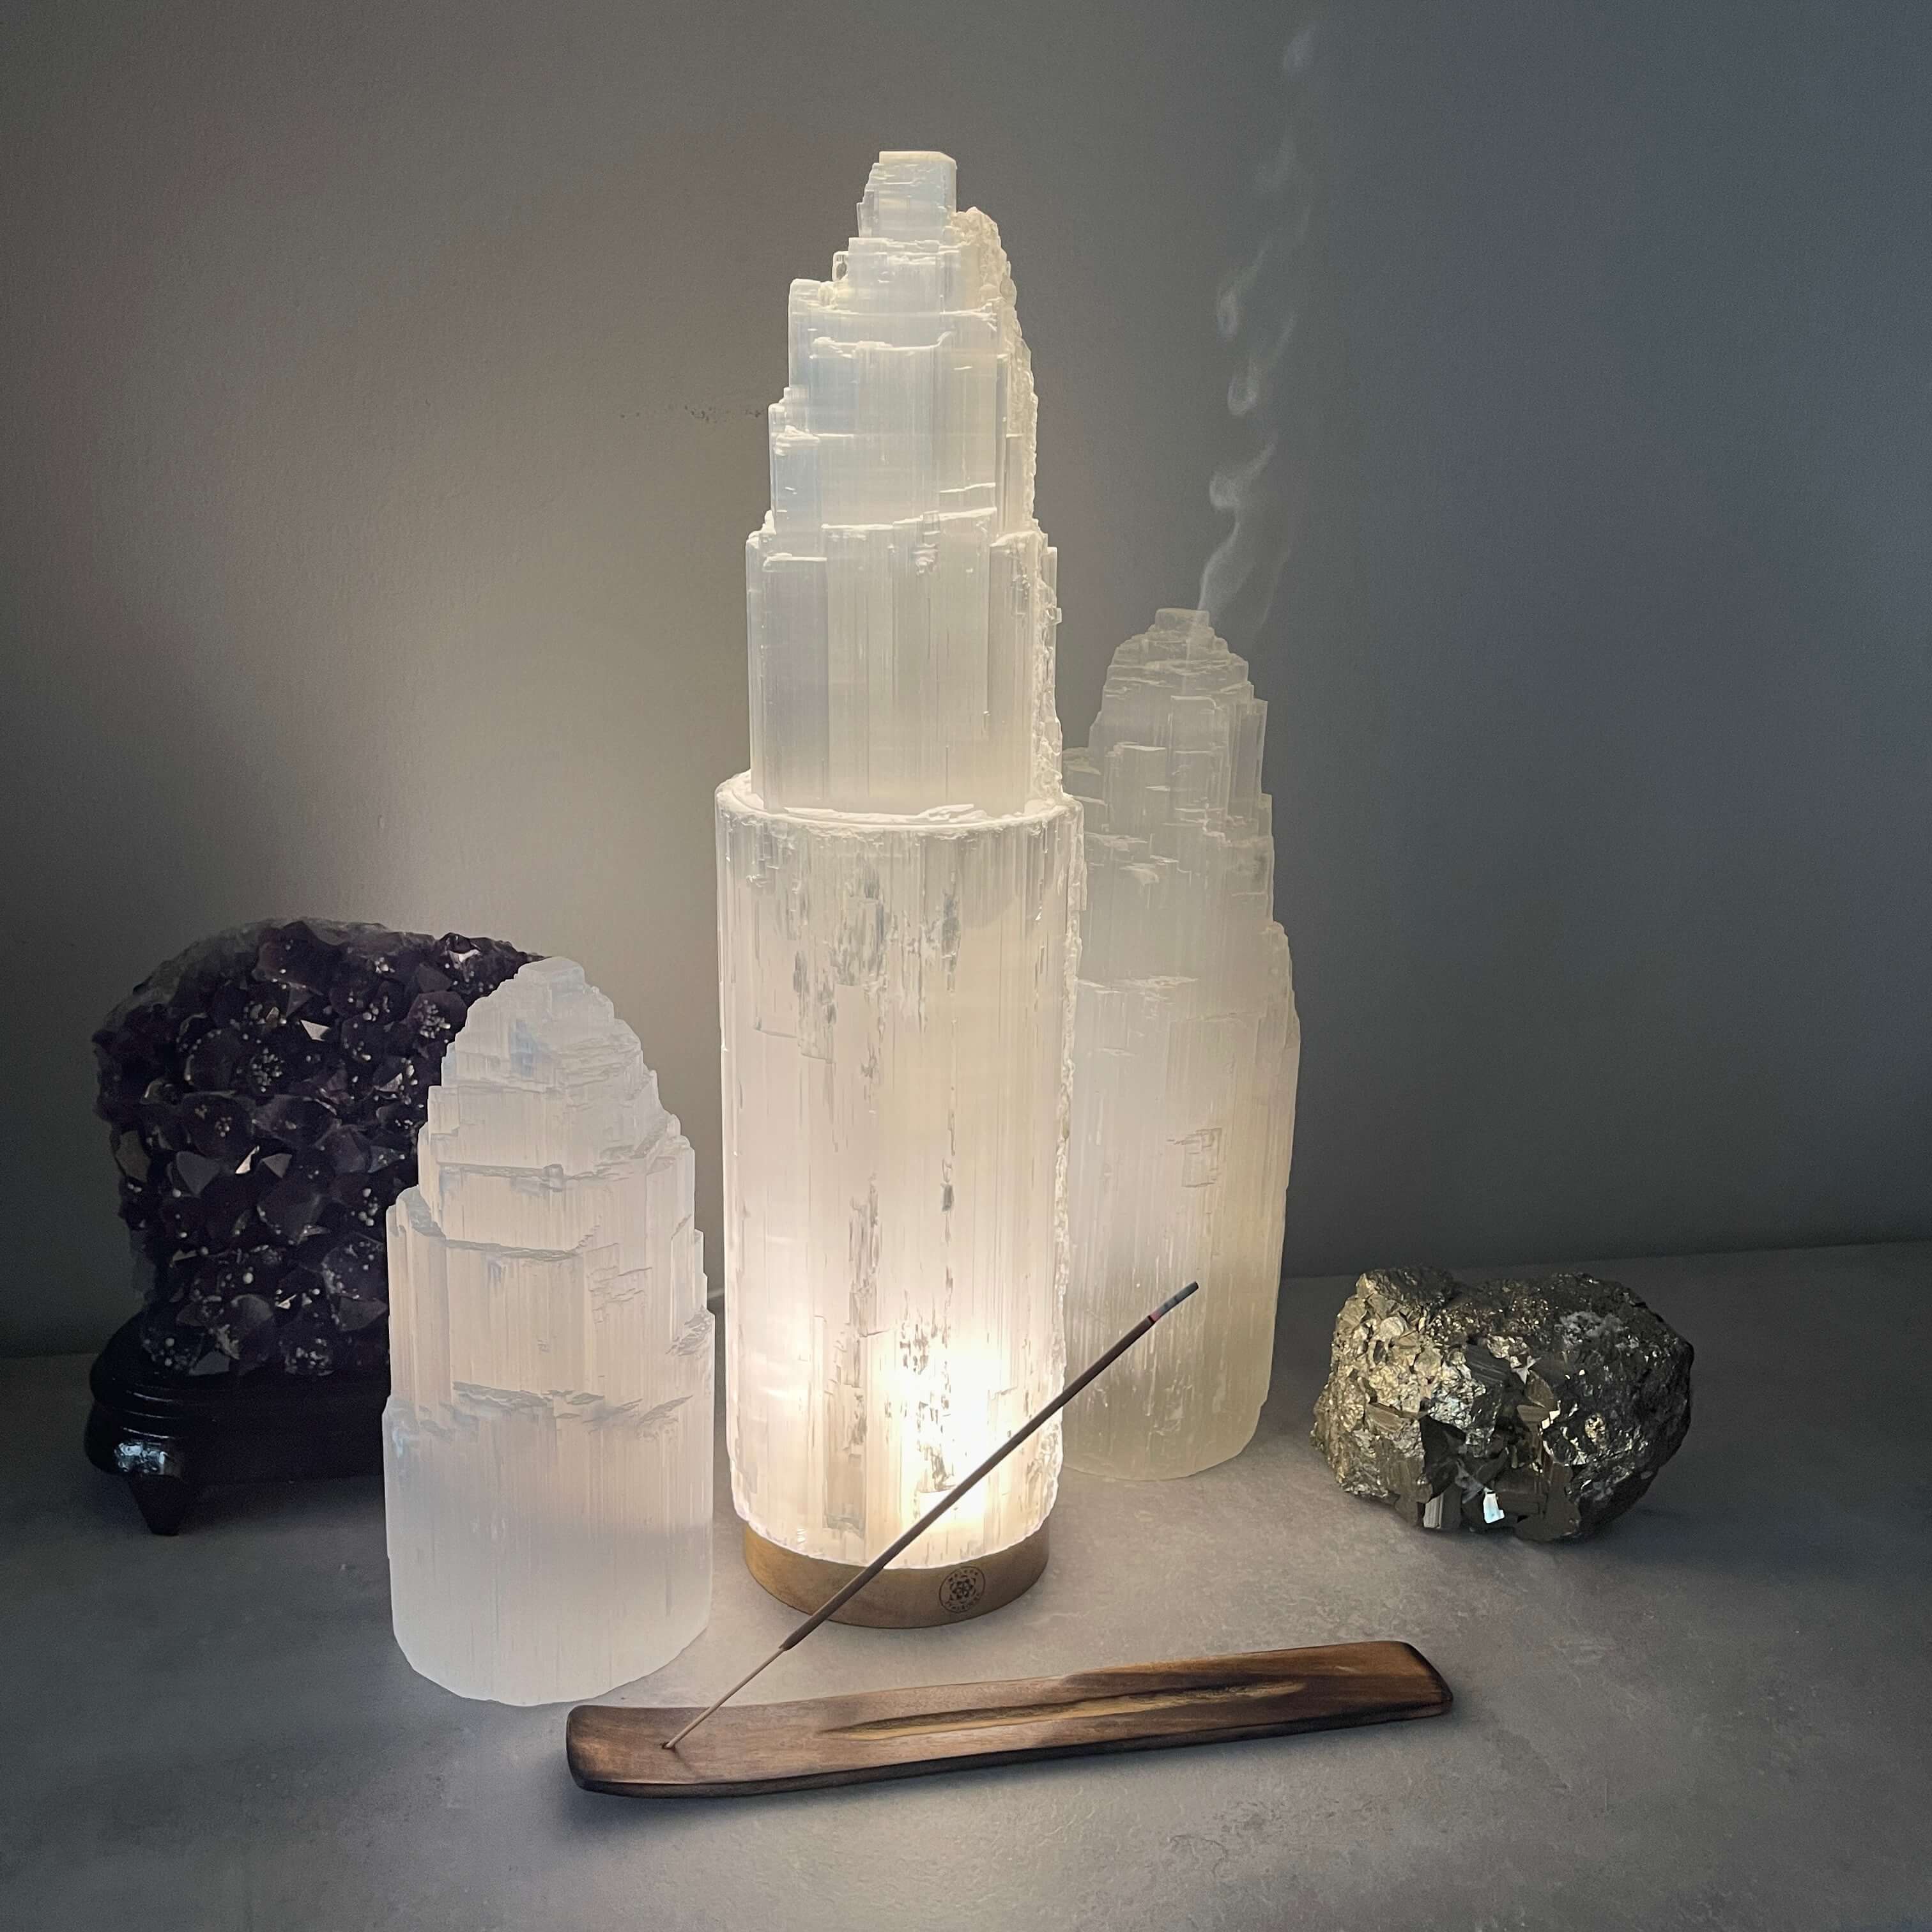 A collection of selenite crystals with different sizes